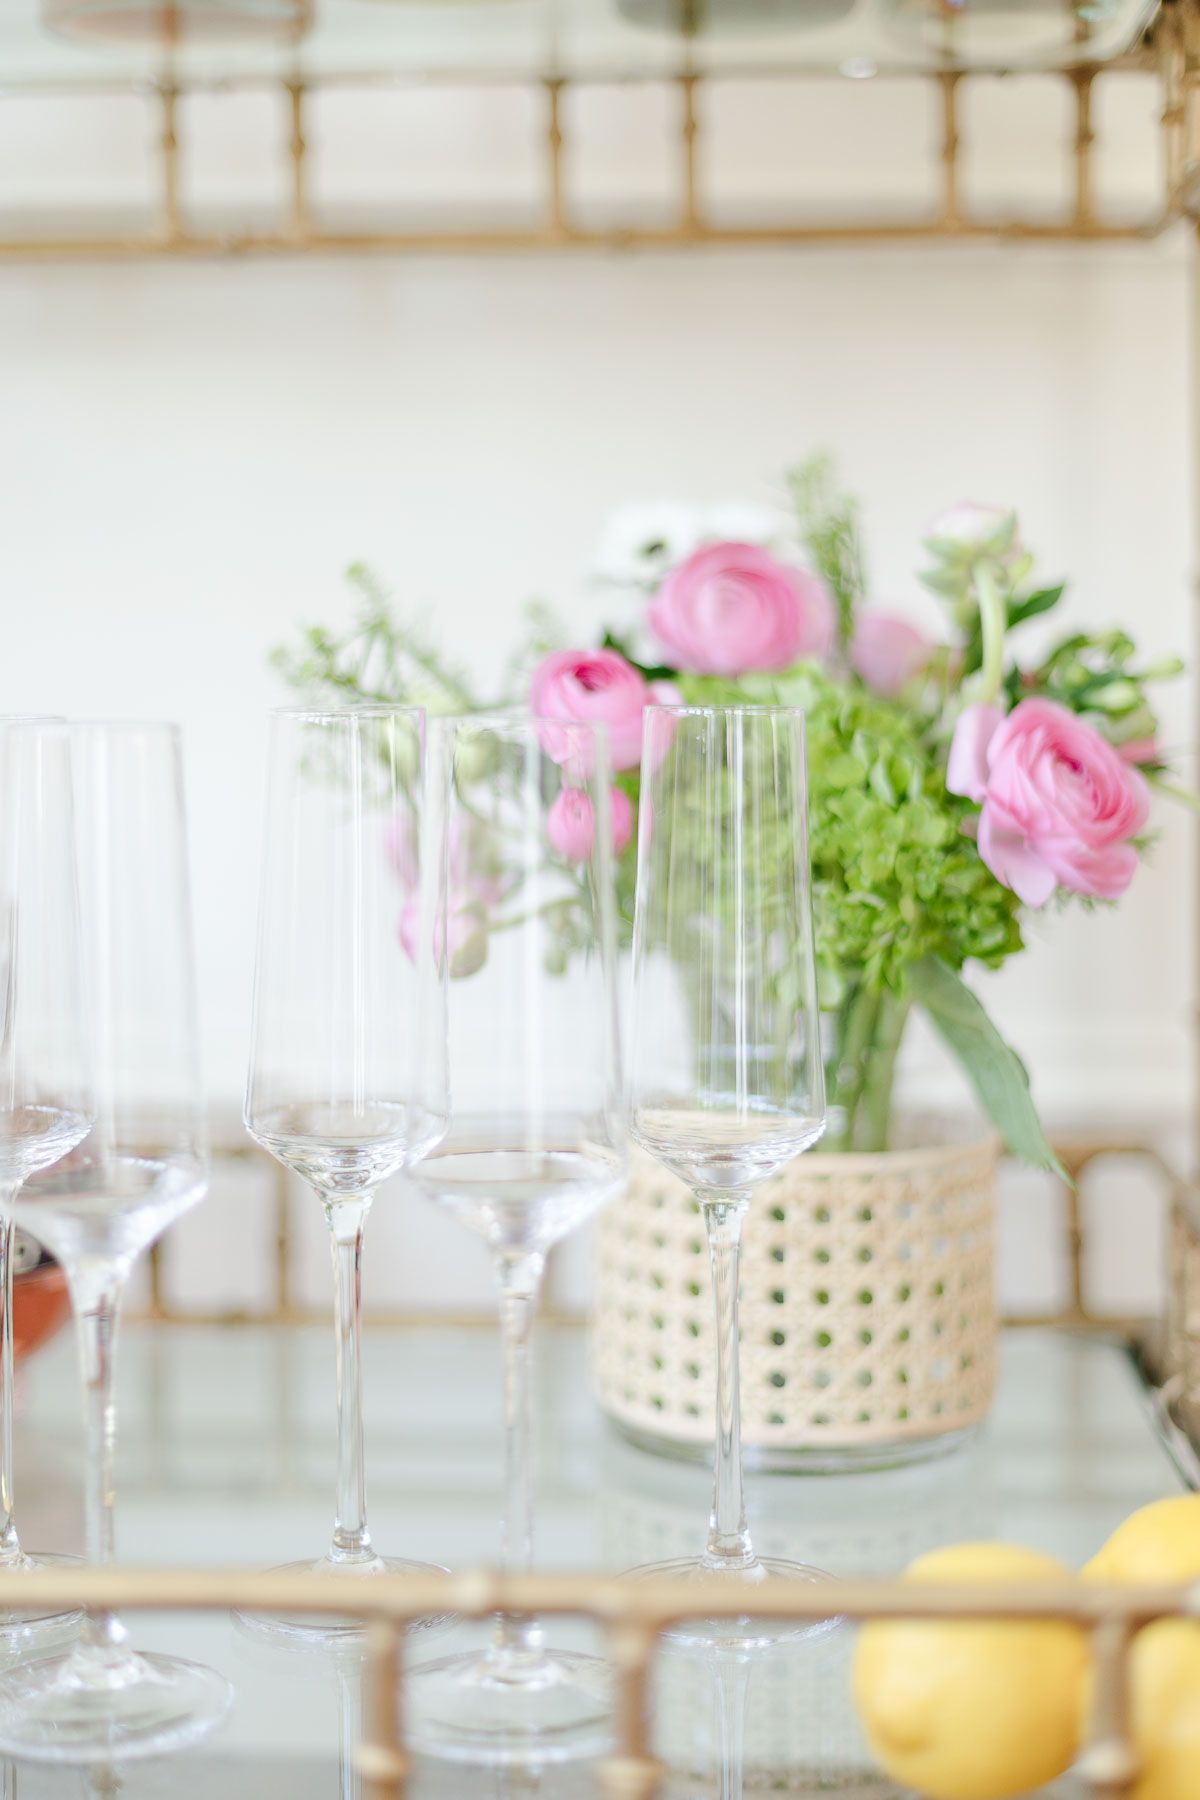 Empty champagne glasses and fresh flowers set up for a bubbly bar